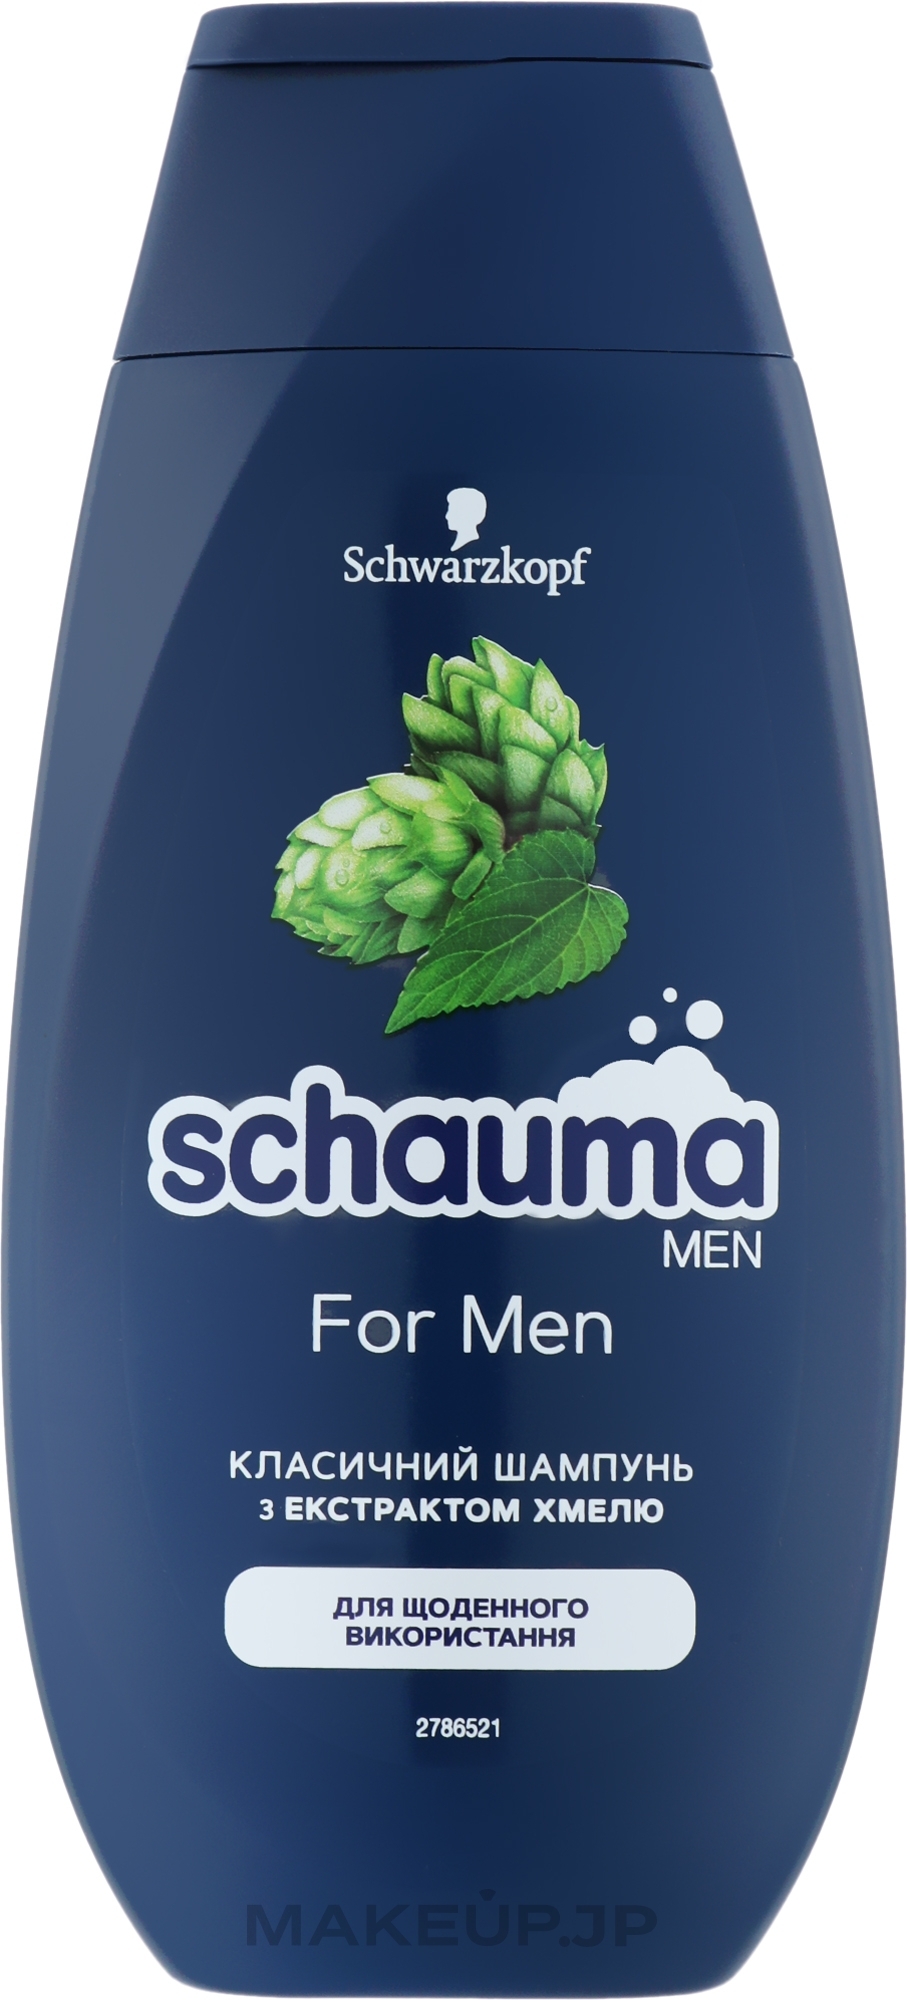 Shampoo for Men with Hops Silicones-Free - Schwarzkopf Schauma Men Shampoo With Hops Extract Without Silicone — photo 250 ml